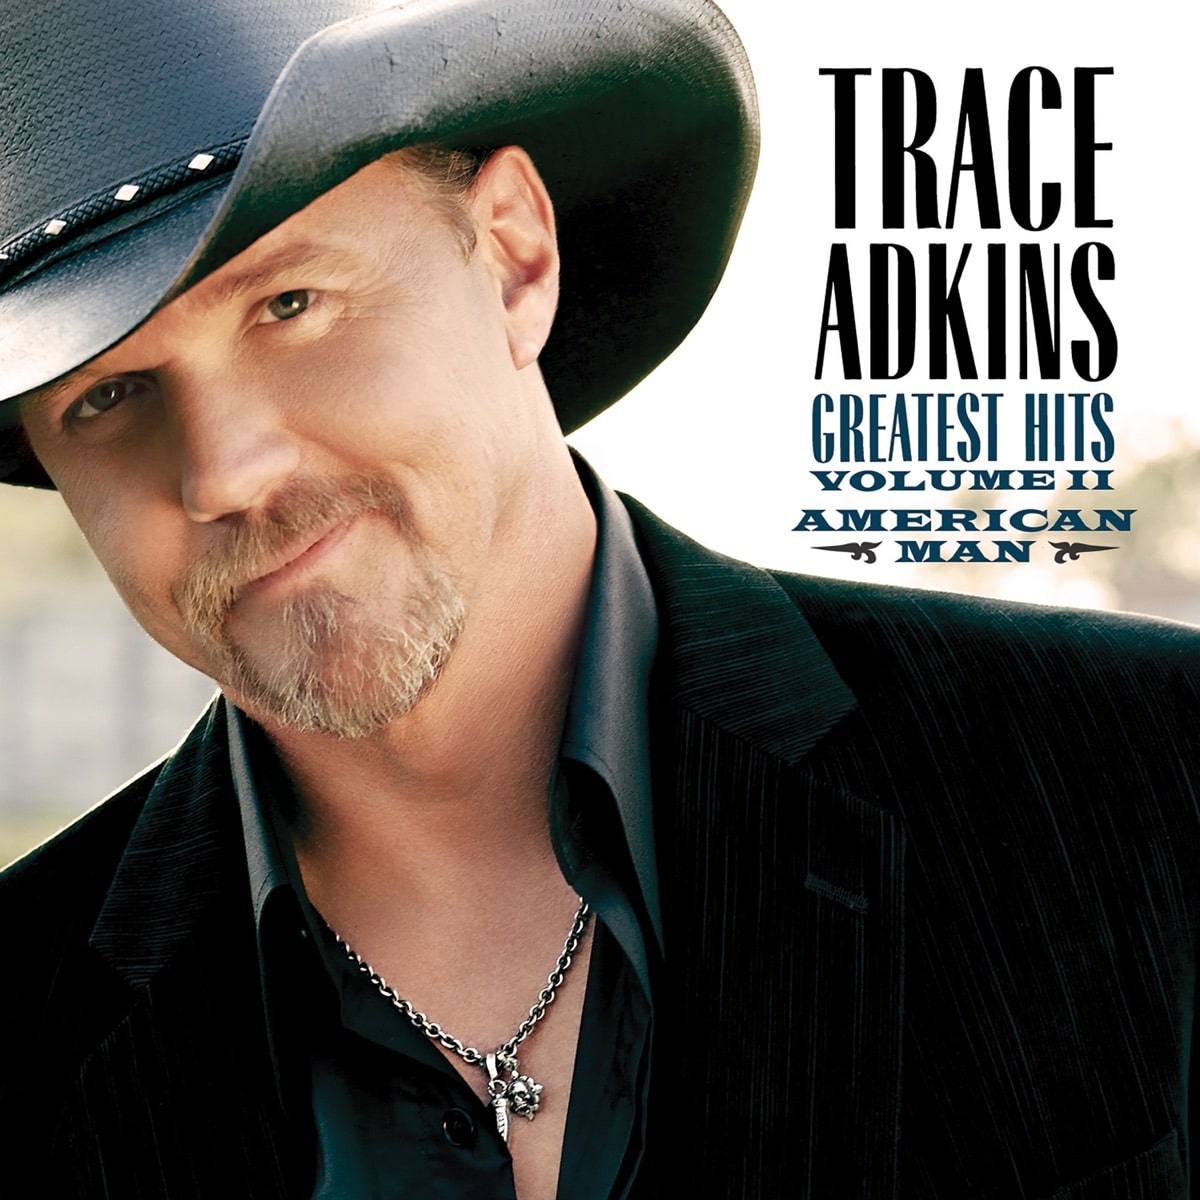 Trace Adkins included "You're Gonna Miss This" on his Greatest Hits album